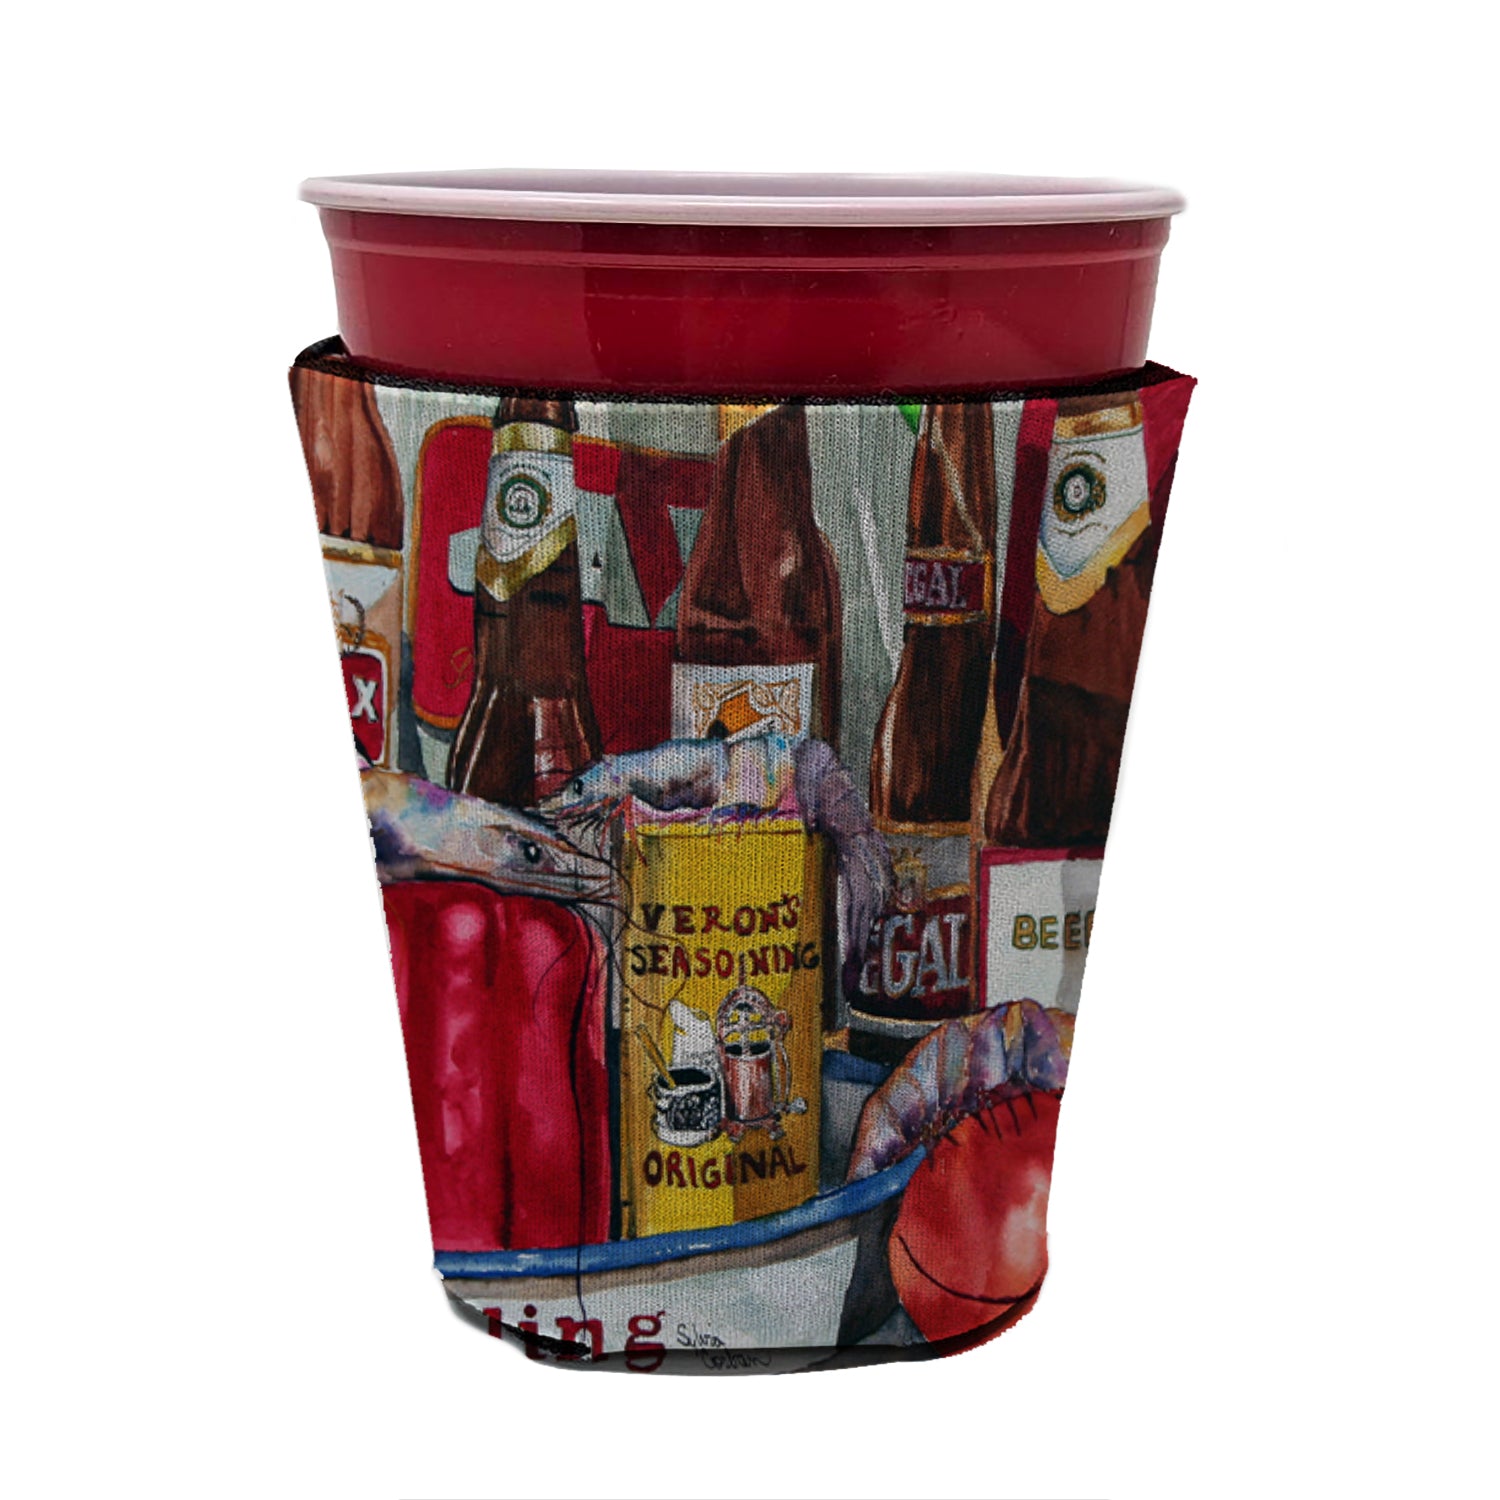 Veron's and New Orleans Beers Red Cup Beverage Insulator Hugger